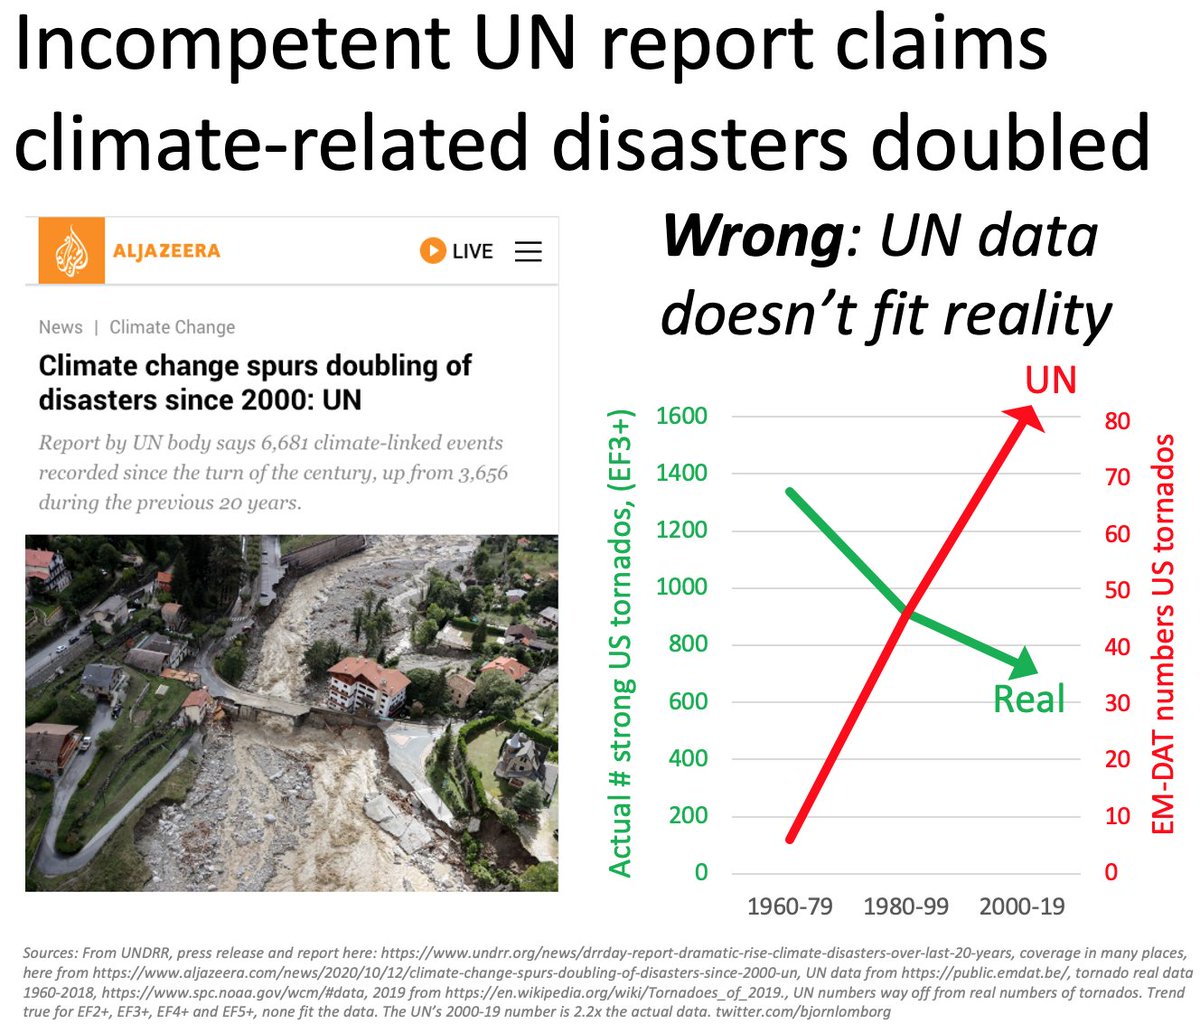 New UN report claims climate-related disasters have doubledThe report is incompetent and wrong on pretty much all accountsThe report should be withdrawnThreadReport here:  https://www.undrr.org/news/drrday-report-dramatic-rise-climate-disasters-over-last-20-yearsData here:  https://public.emdat.be 